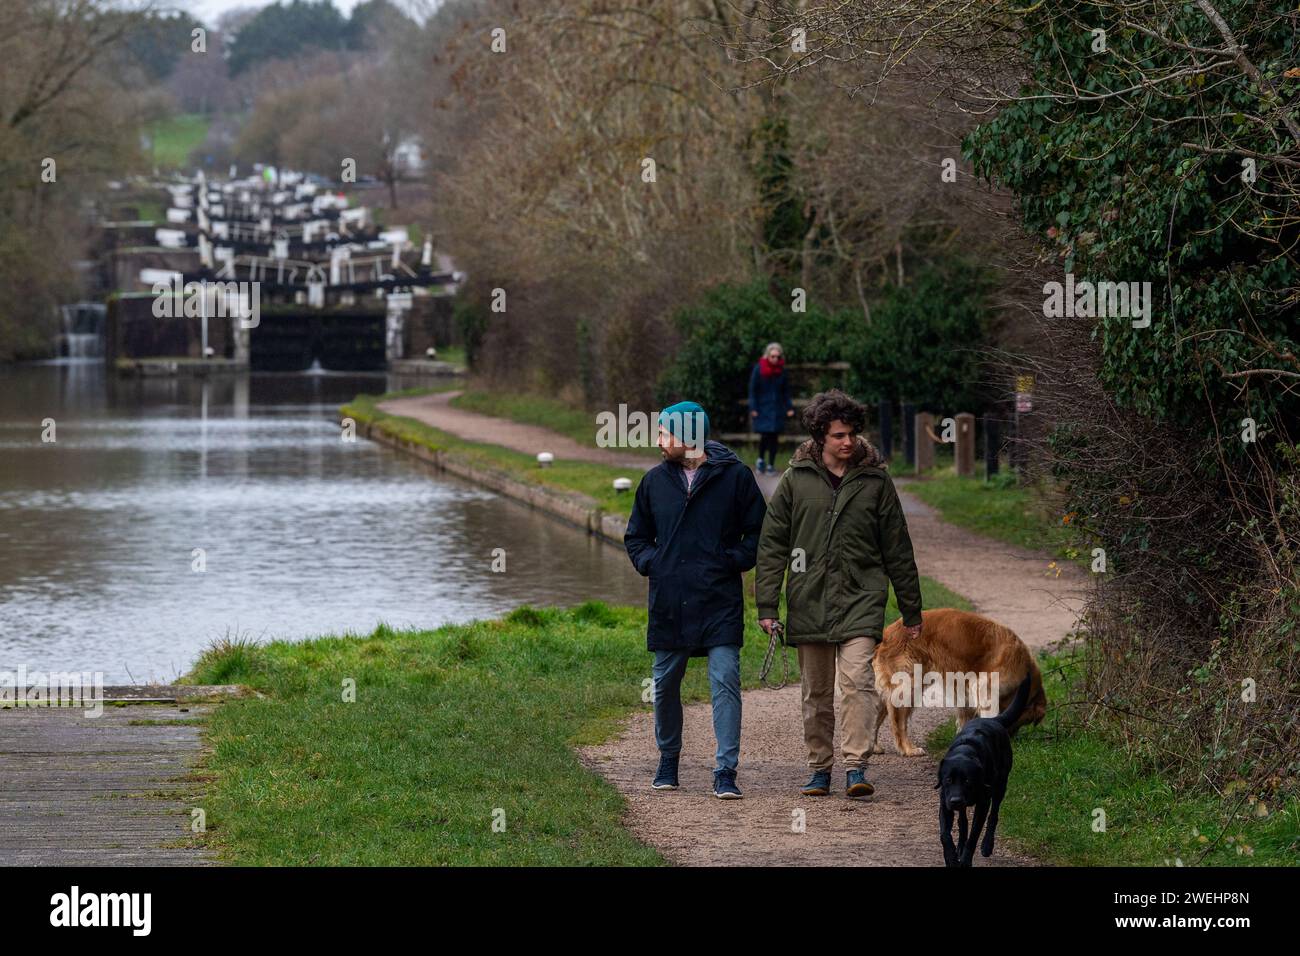 Hatton Locks on the Grand Union canal, Warwickshire, Royaume-Uni Banque D'Images